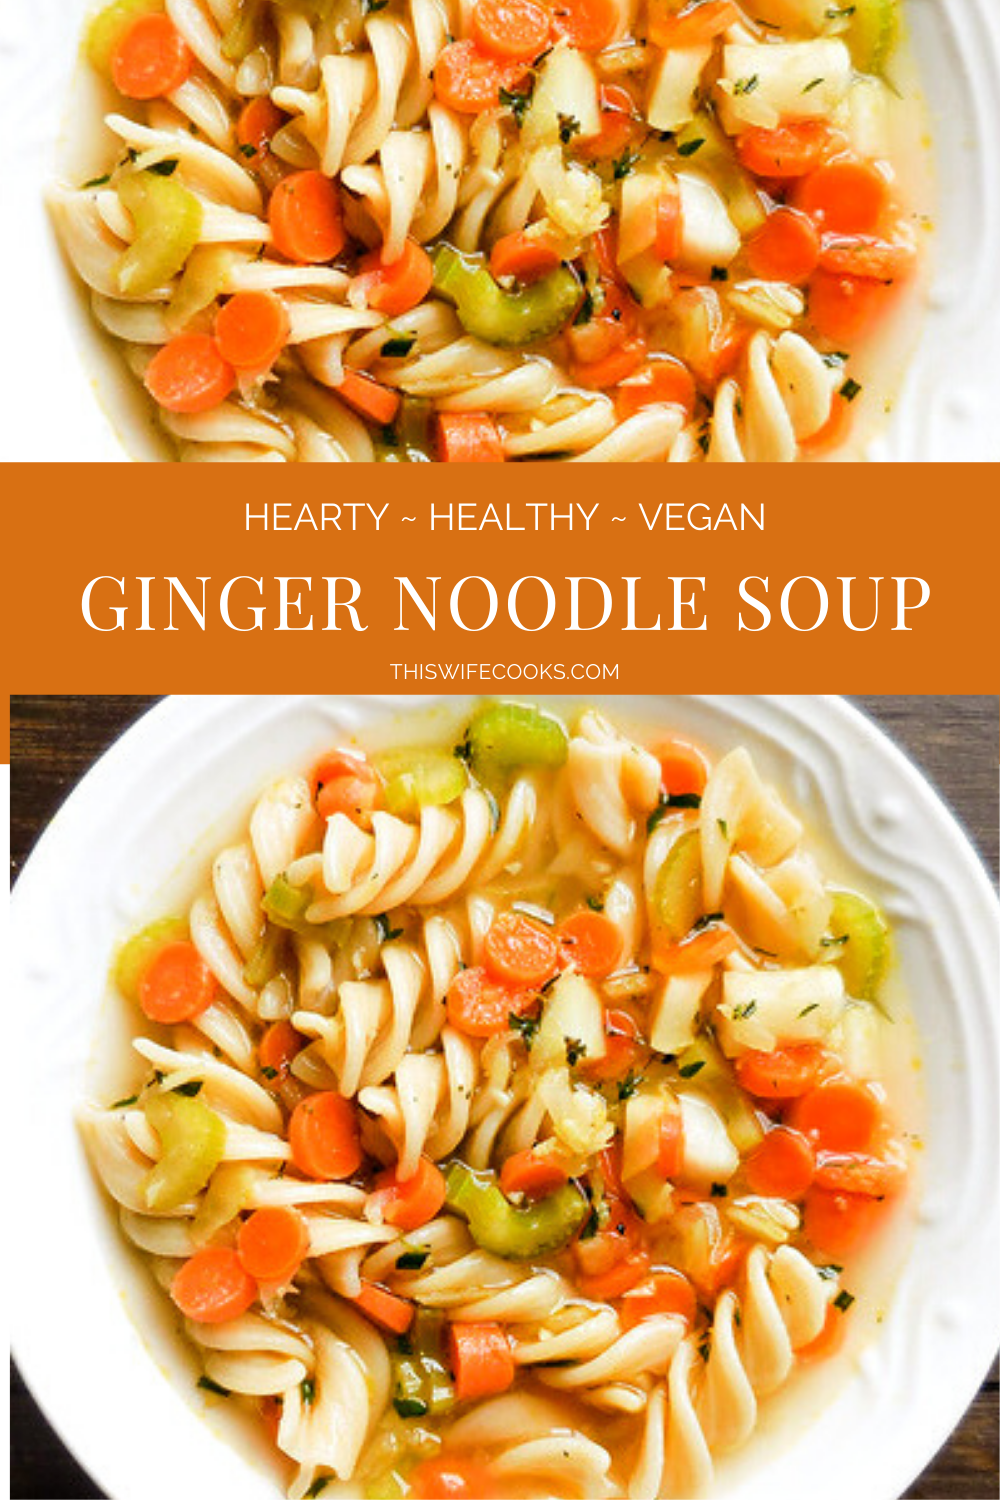 Hearty without being heavy, this aromatic Vegan Ginger Noodle Soup is packed with good-for-you vegetables and herbs. Warm, comforting, and ready to serve in under an hour. | thiswifecooks.com #gingernoodlesoup #noodsouprecipe #gingernoodlerecipes #vegannoodlesouprecipes #vegansouprecipeshealthy #vegansouprecipeseasy #thiswifecooksrecipes #vegangingersoup #veganquarantinemeals via @thiswifecooks